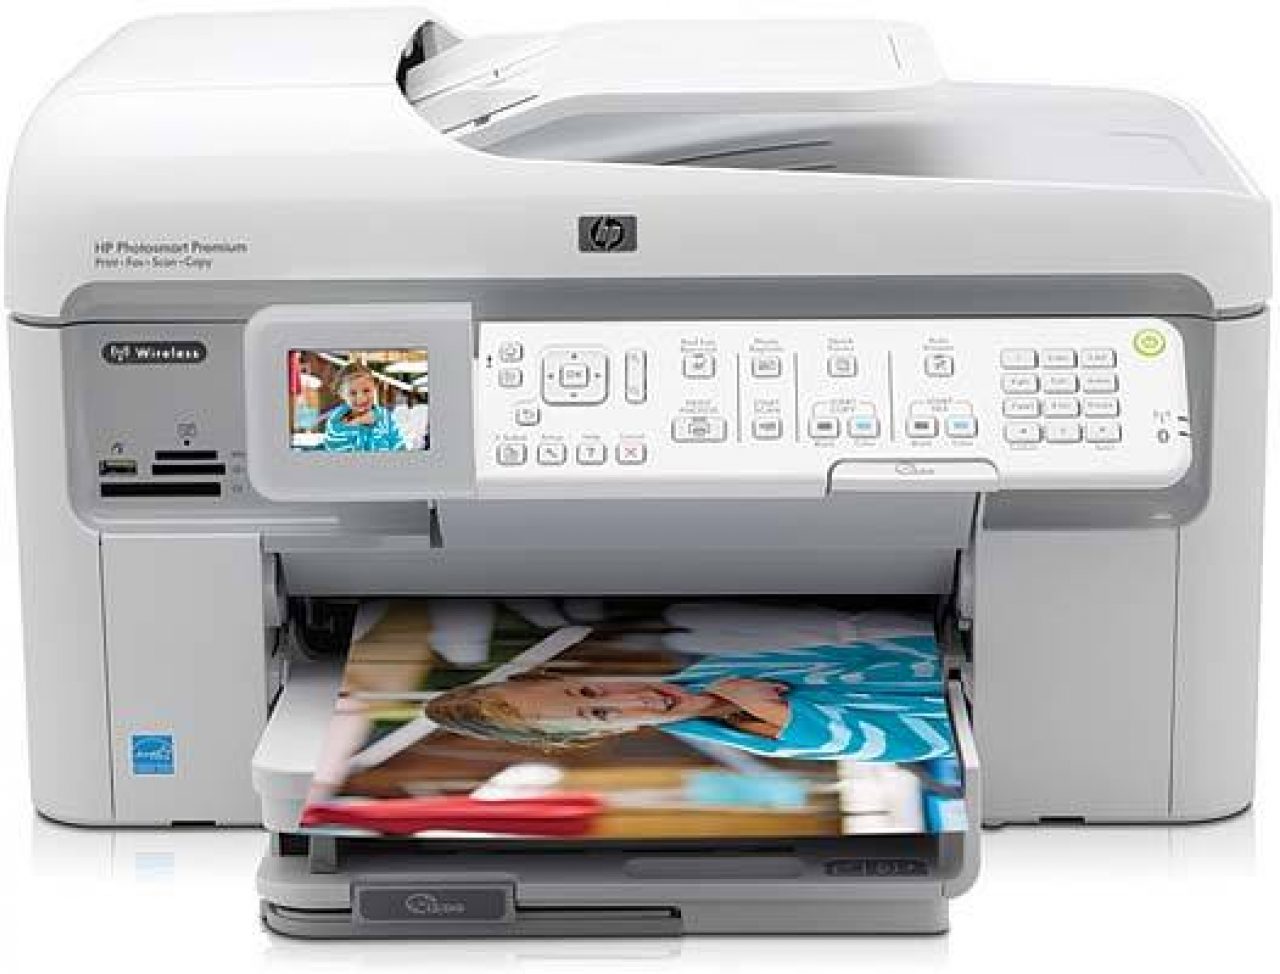 HP Photosmart Fax All-in-One Review | Photography Blog